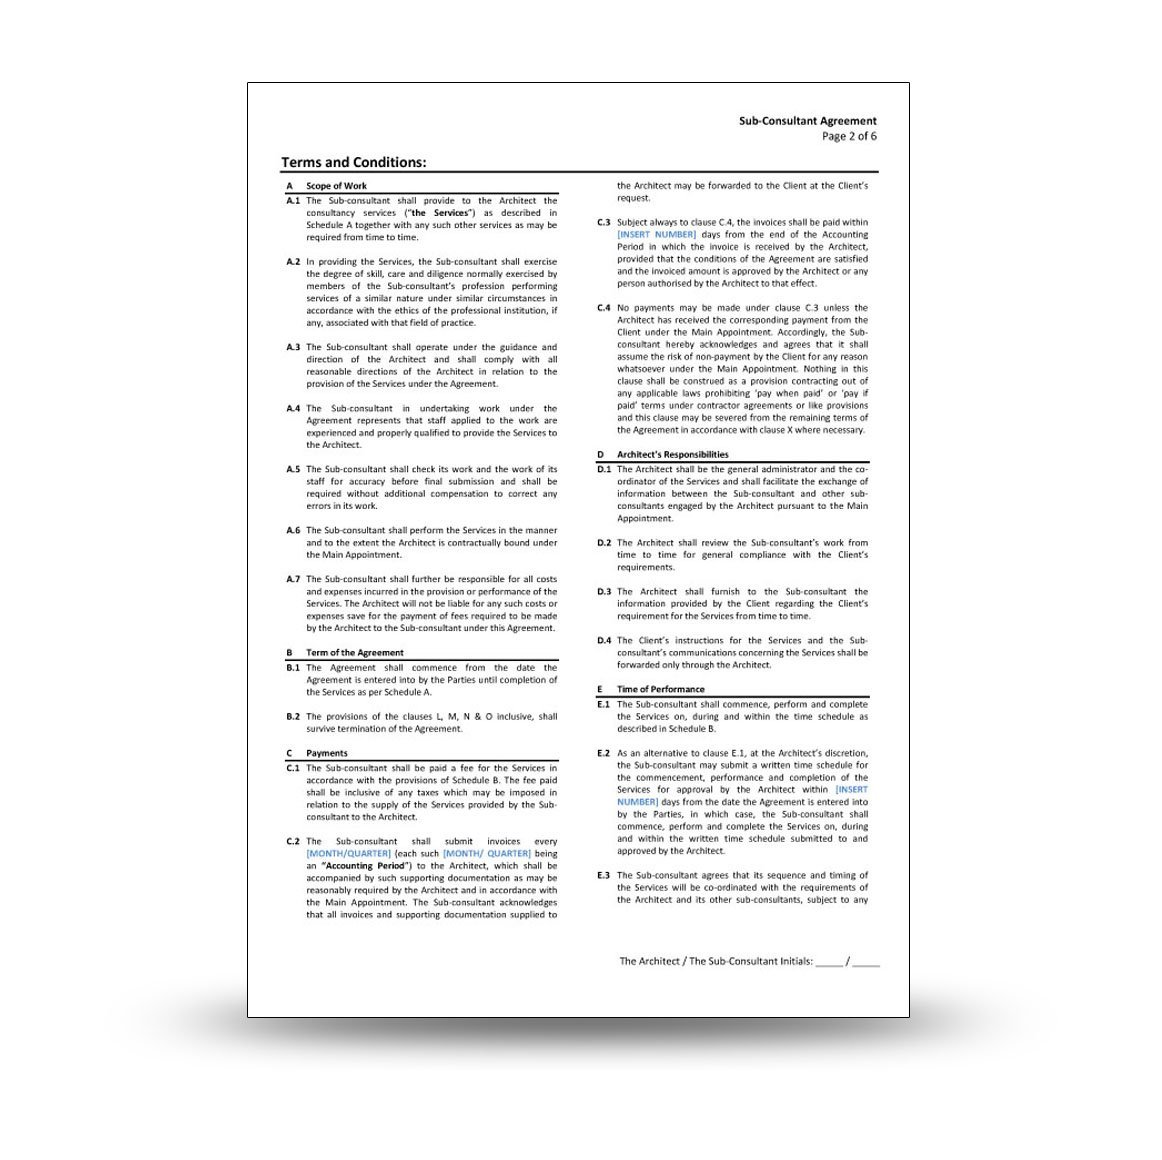 Consulant Agreement Template